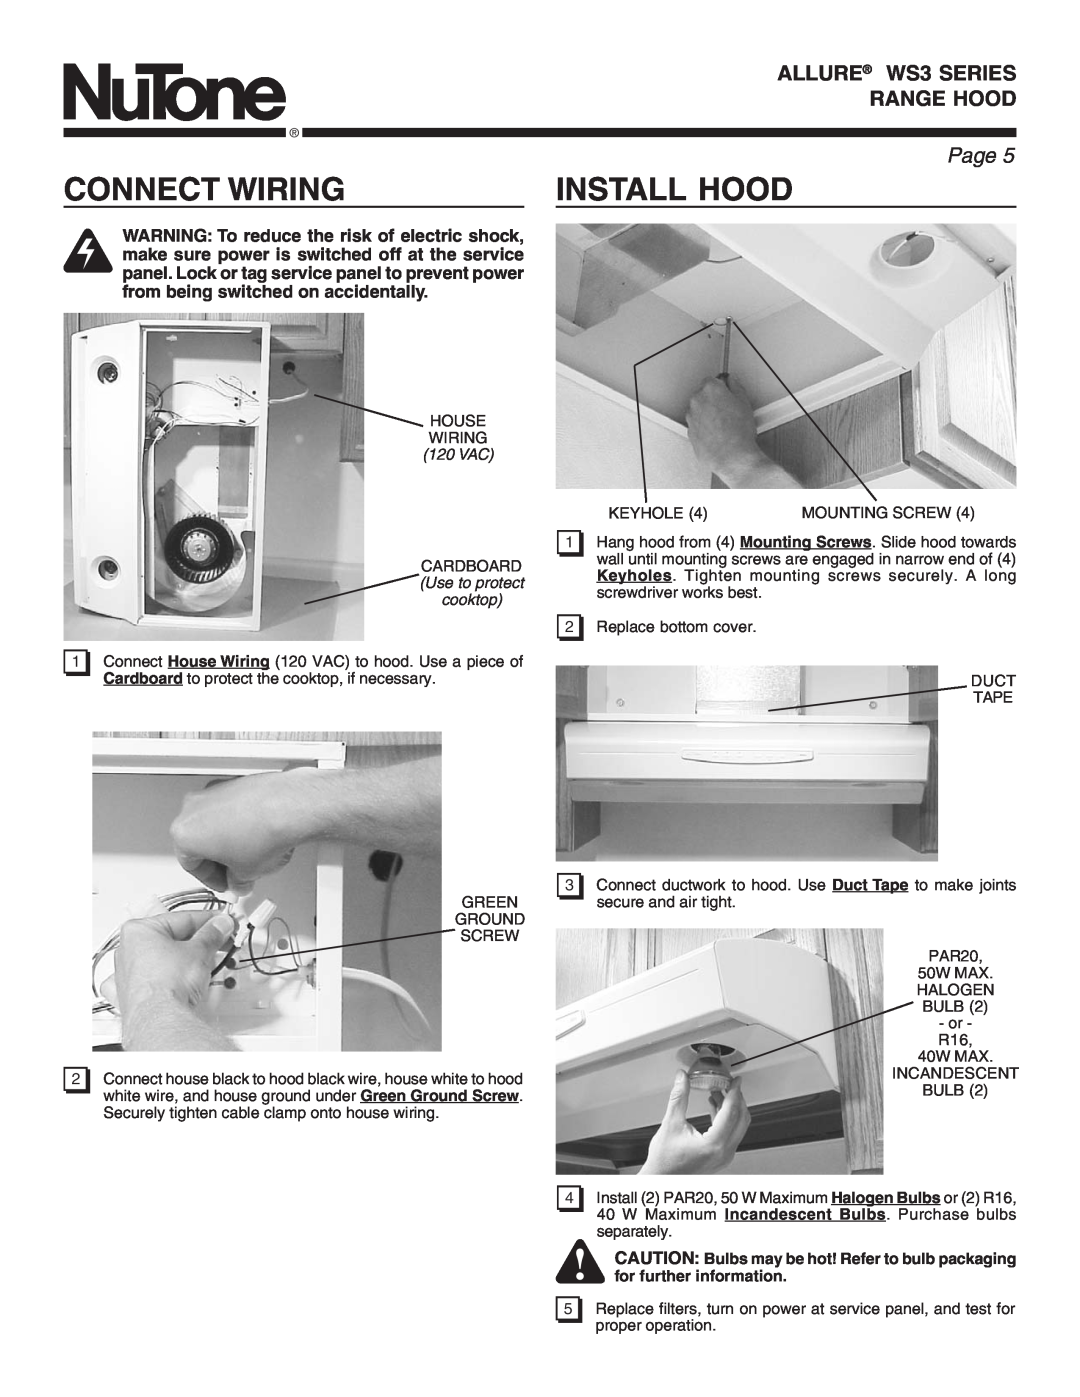 NuTone manual Connect Wiring, Install Hood, from being switched on accidentally, ALLURE WS3 SERIES RANGE HOOD, Page 